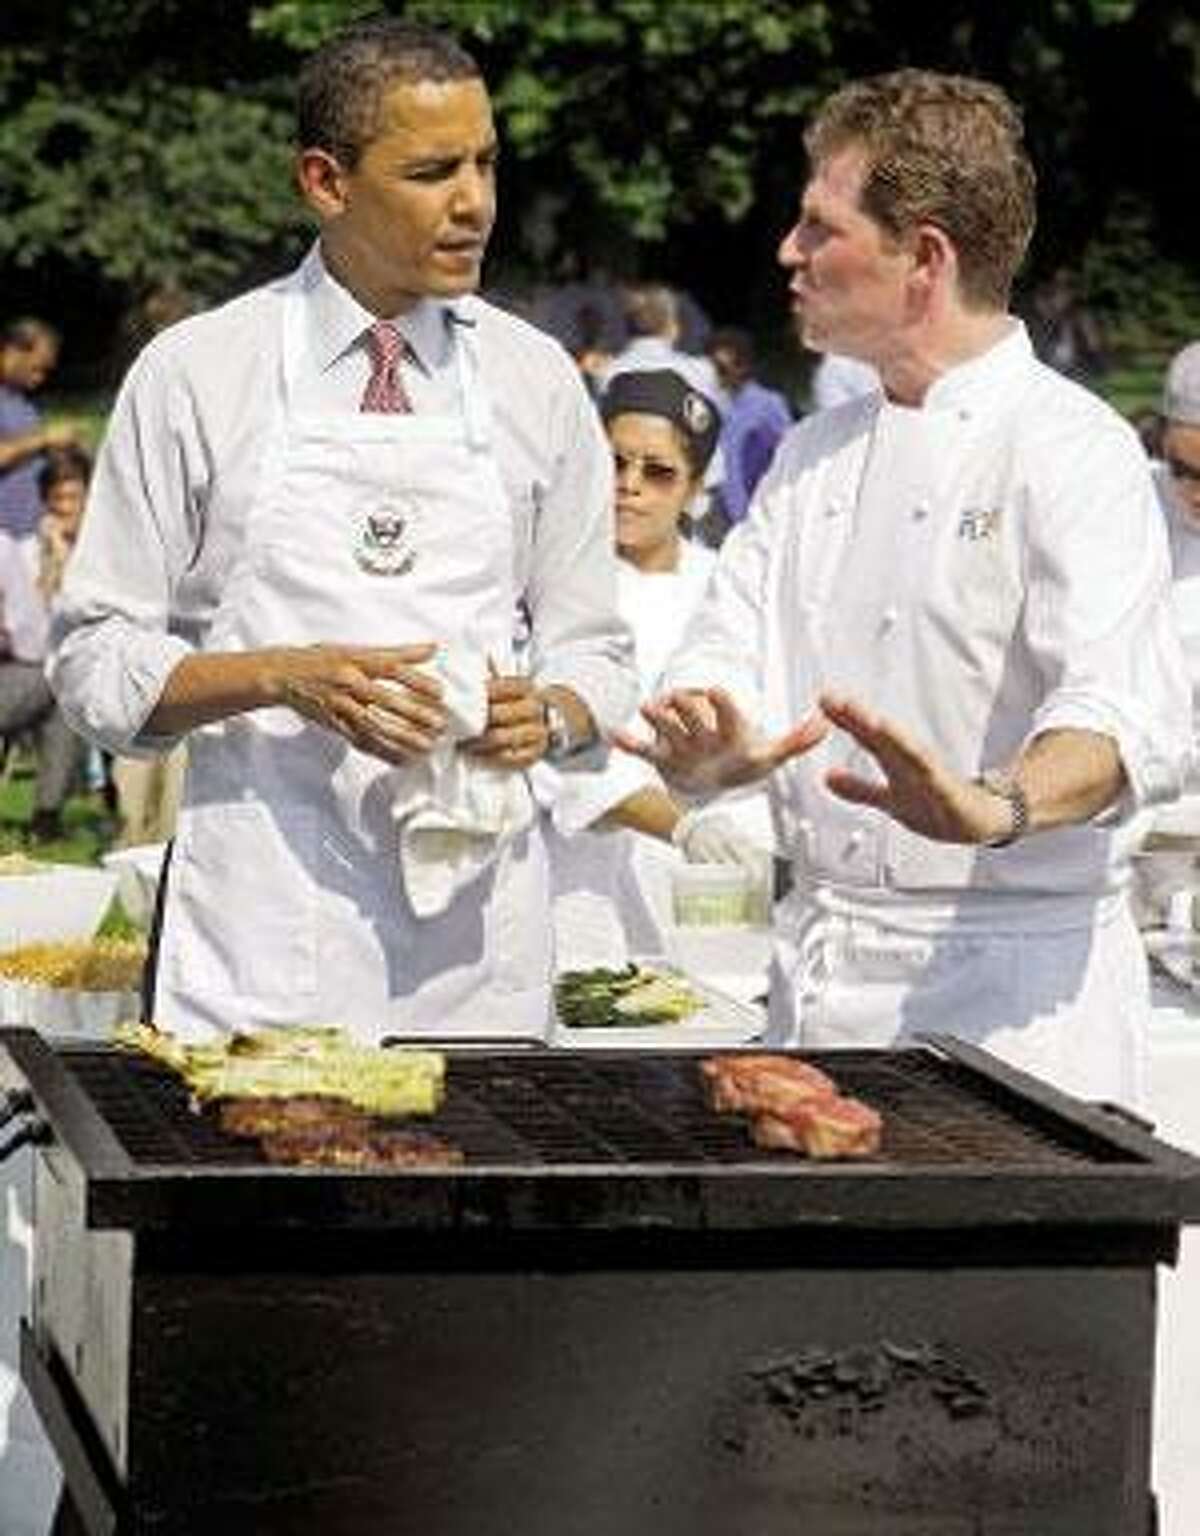 Even President Barack Obama needed a few grilling tips from chef Bobby Flay shown here on the South Lawn of the White House. (Haraz N. Ghanbari/Associated Press)